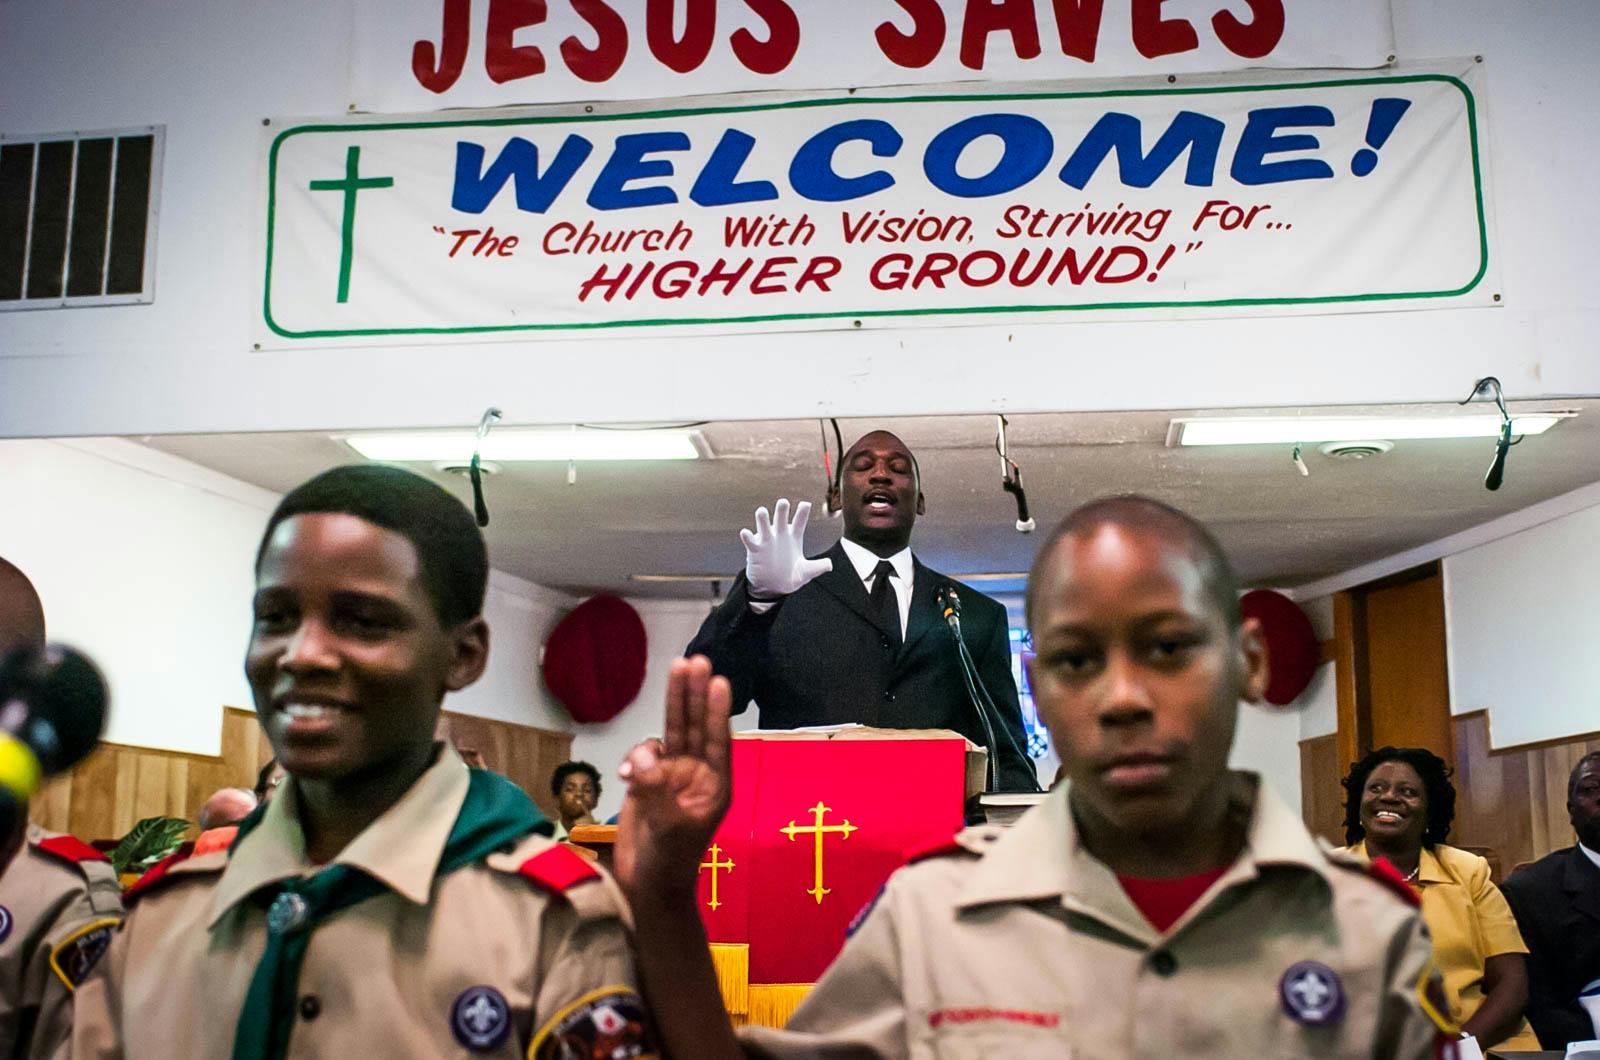 A man in a black suit wearing white glove preaching in a small church, with two boy scouts in the foreground.